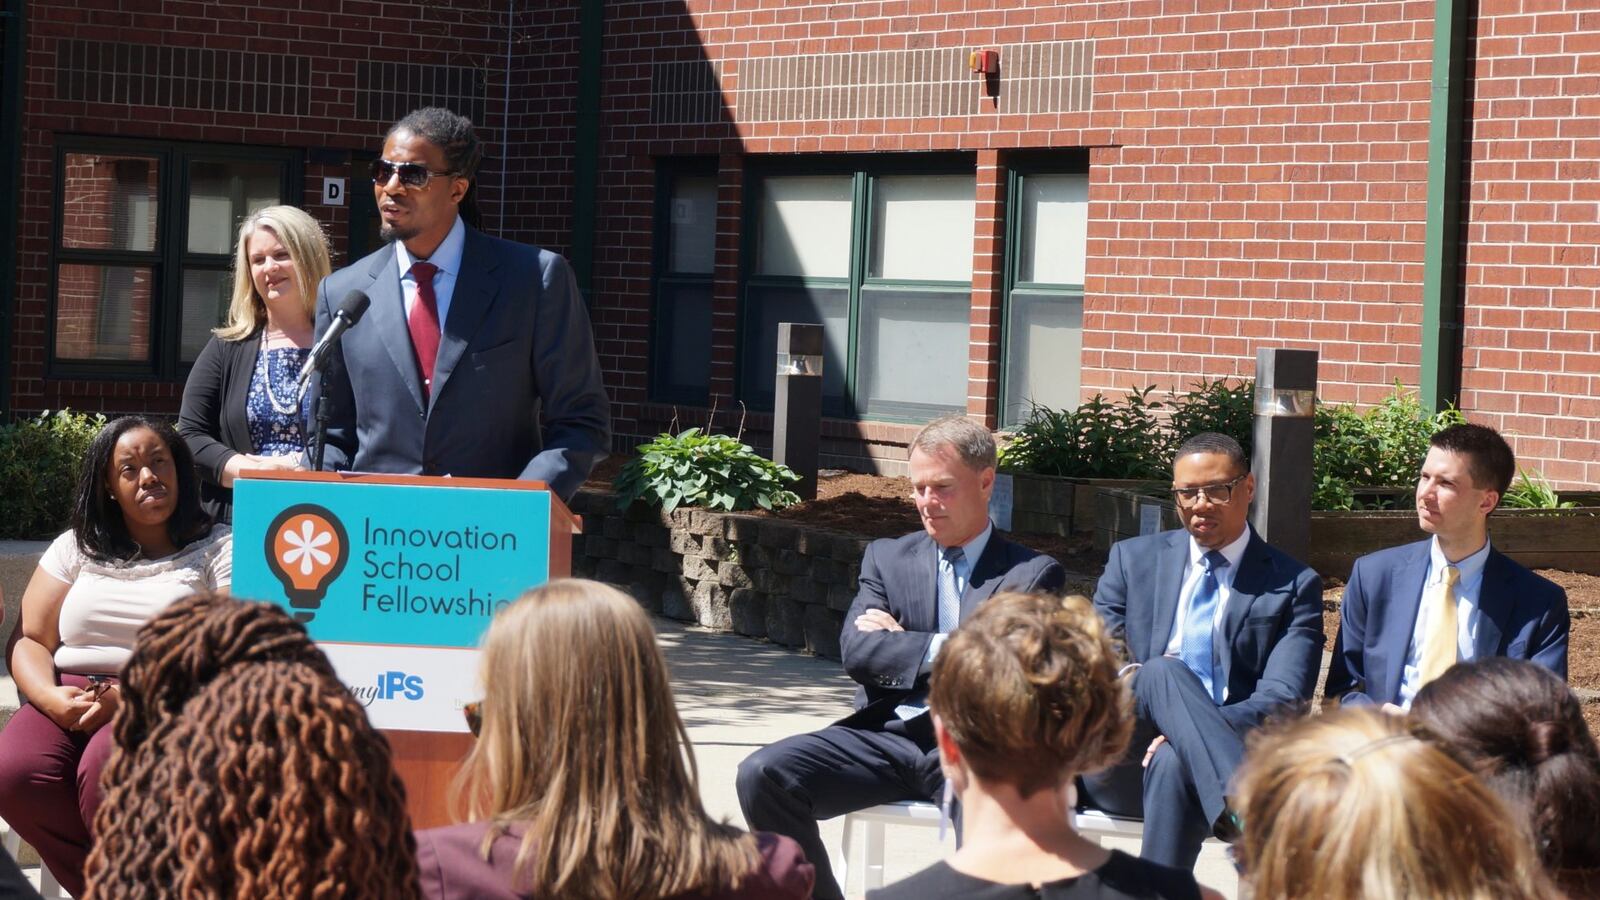 A person wearing a suit speaks from a podium while others sit in chairs beside him and in the crowd. They are outside in the sun and a red brick building in the background.